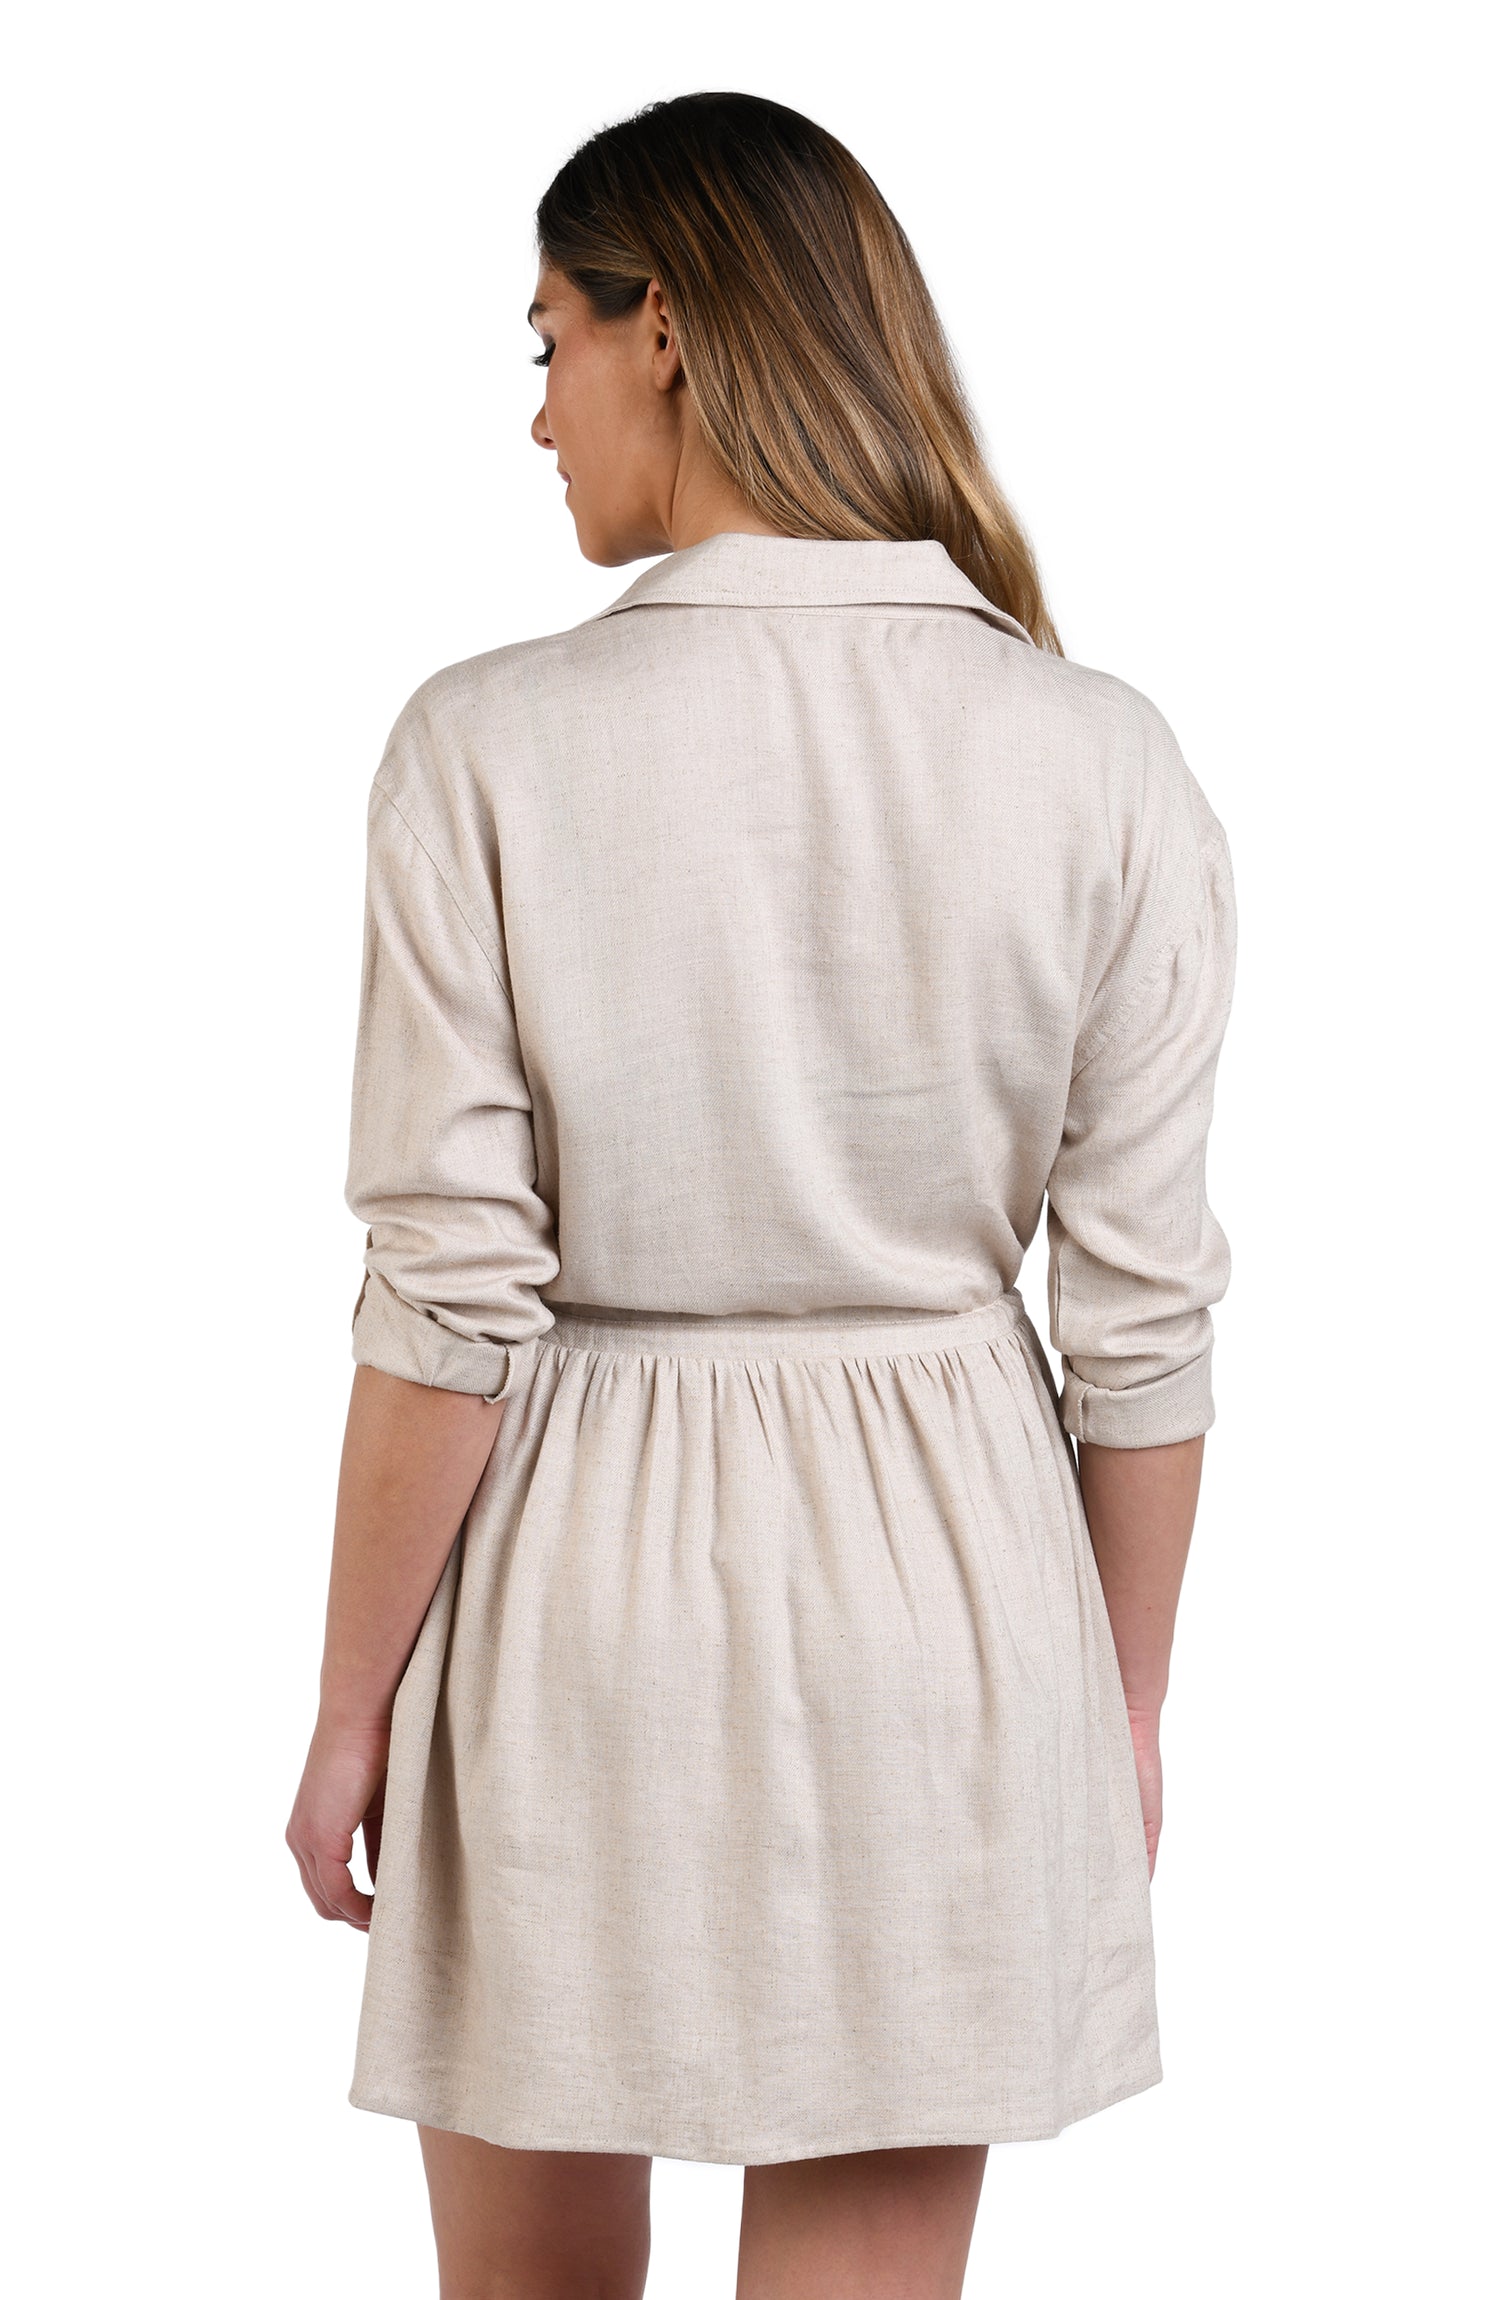 Model is wearing a solid taupe (beige) colored tunnel shirt dress cover up.